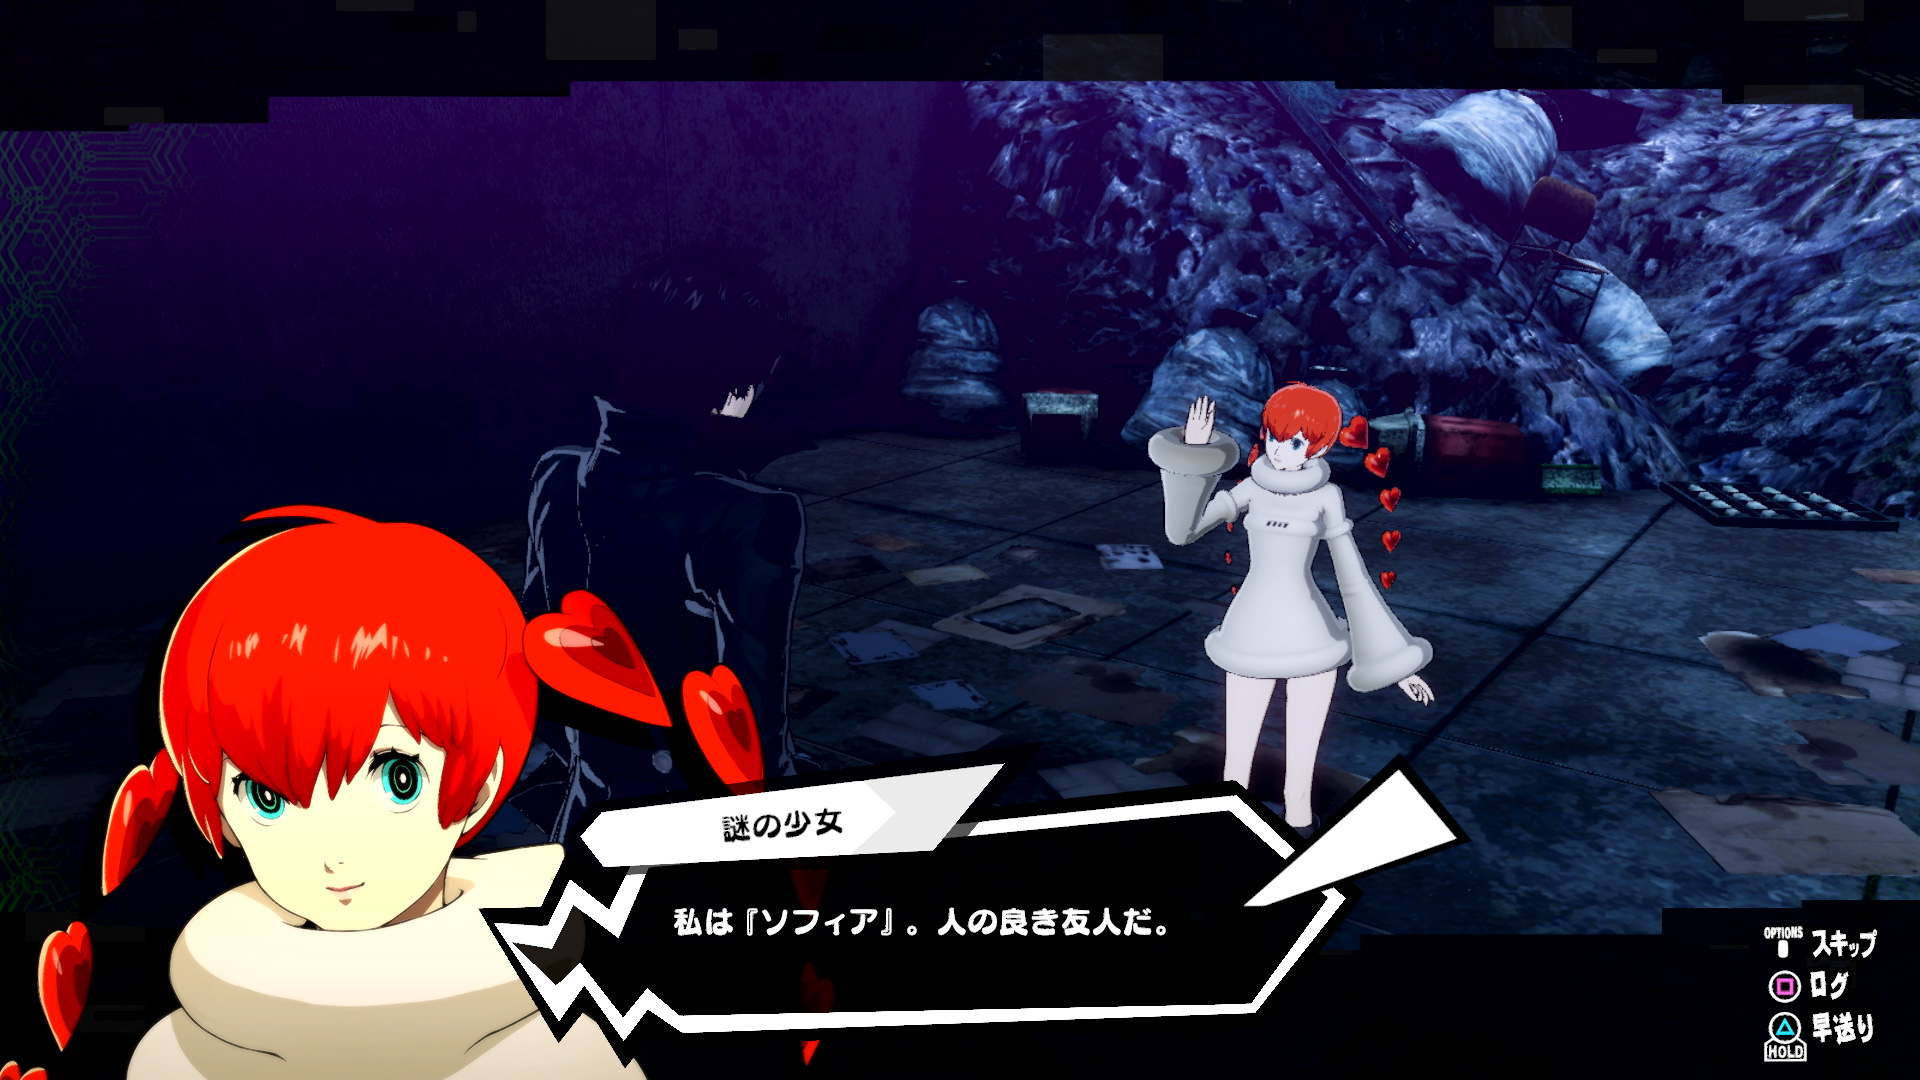 Persona 5 Scramble The Phantom Strikers Gets New Gameplay Footage And Story Details Revealing What Happened After Persona 5 Gamesradar